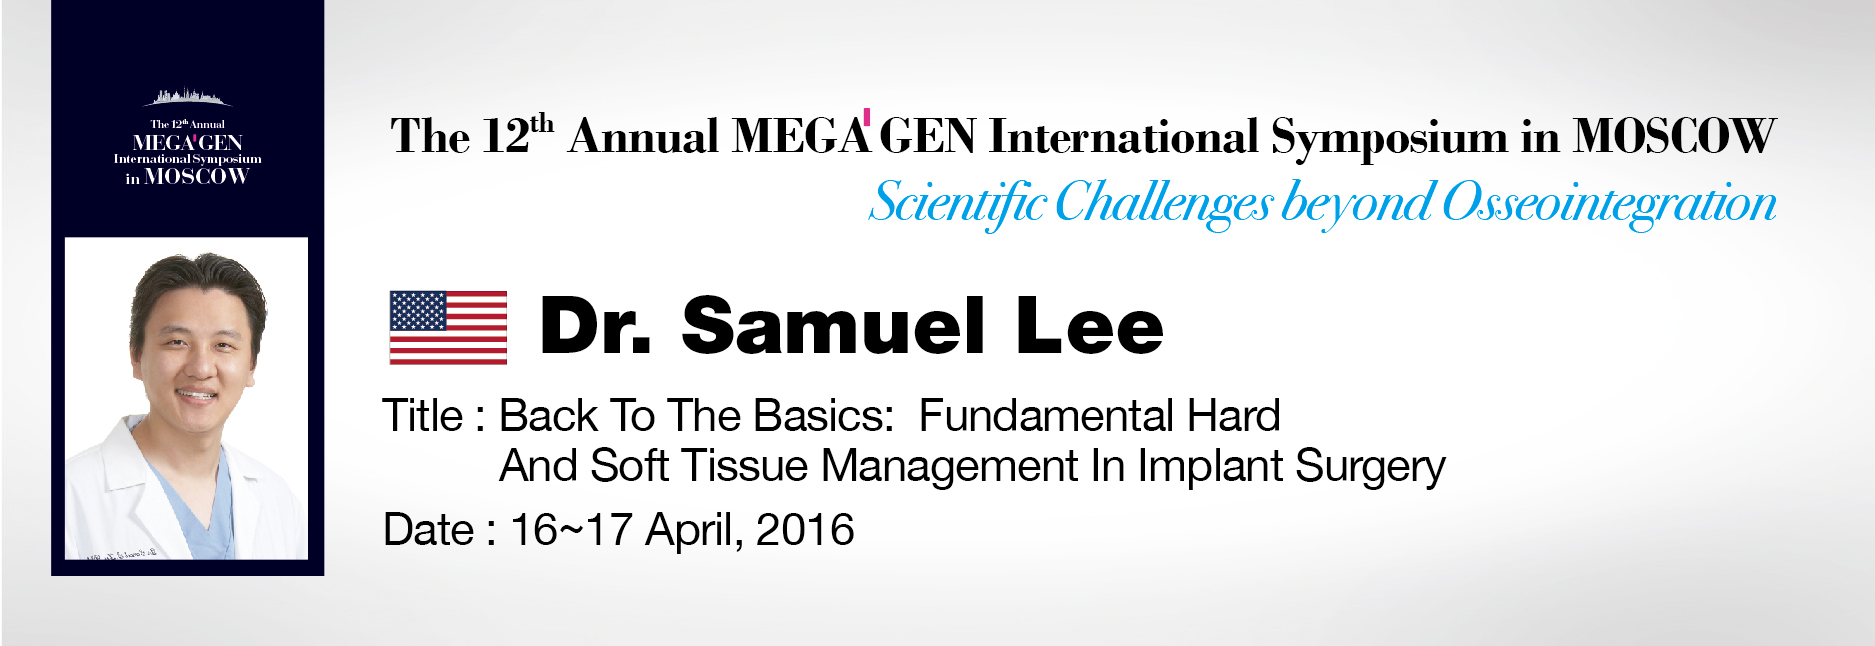 Back To The Basics : Fundamental Hard And Soft Tissue Management In Implant Surgery